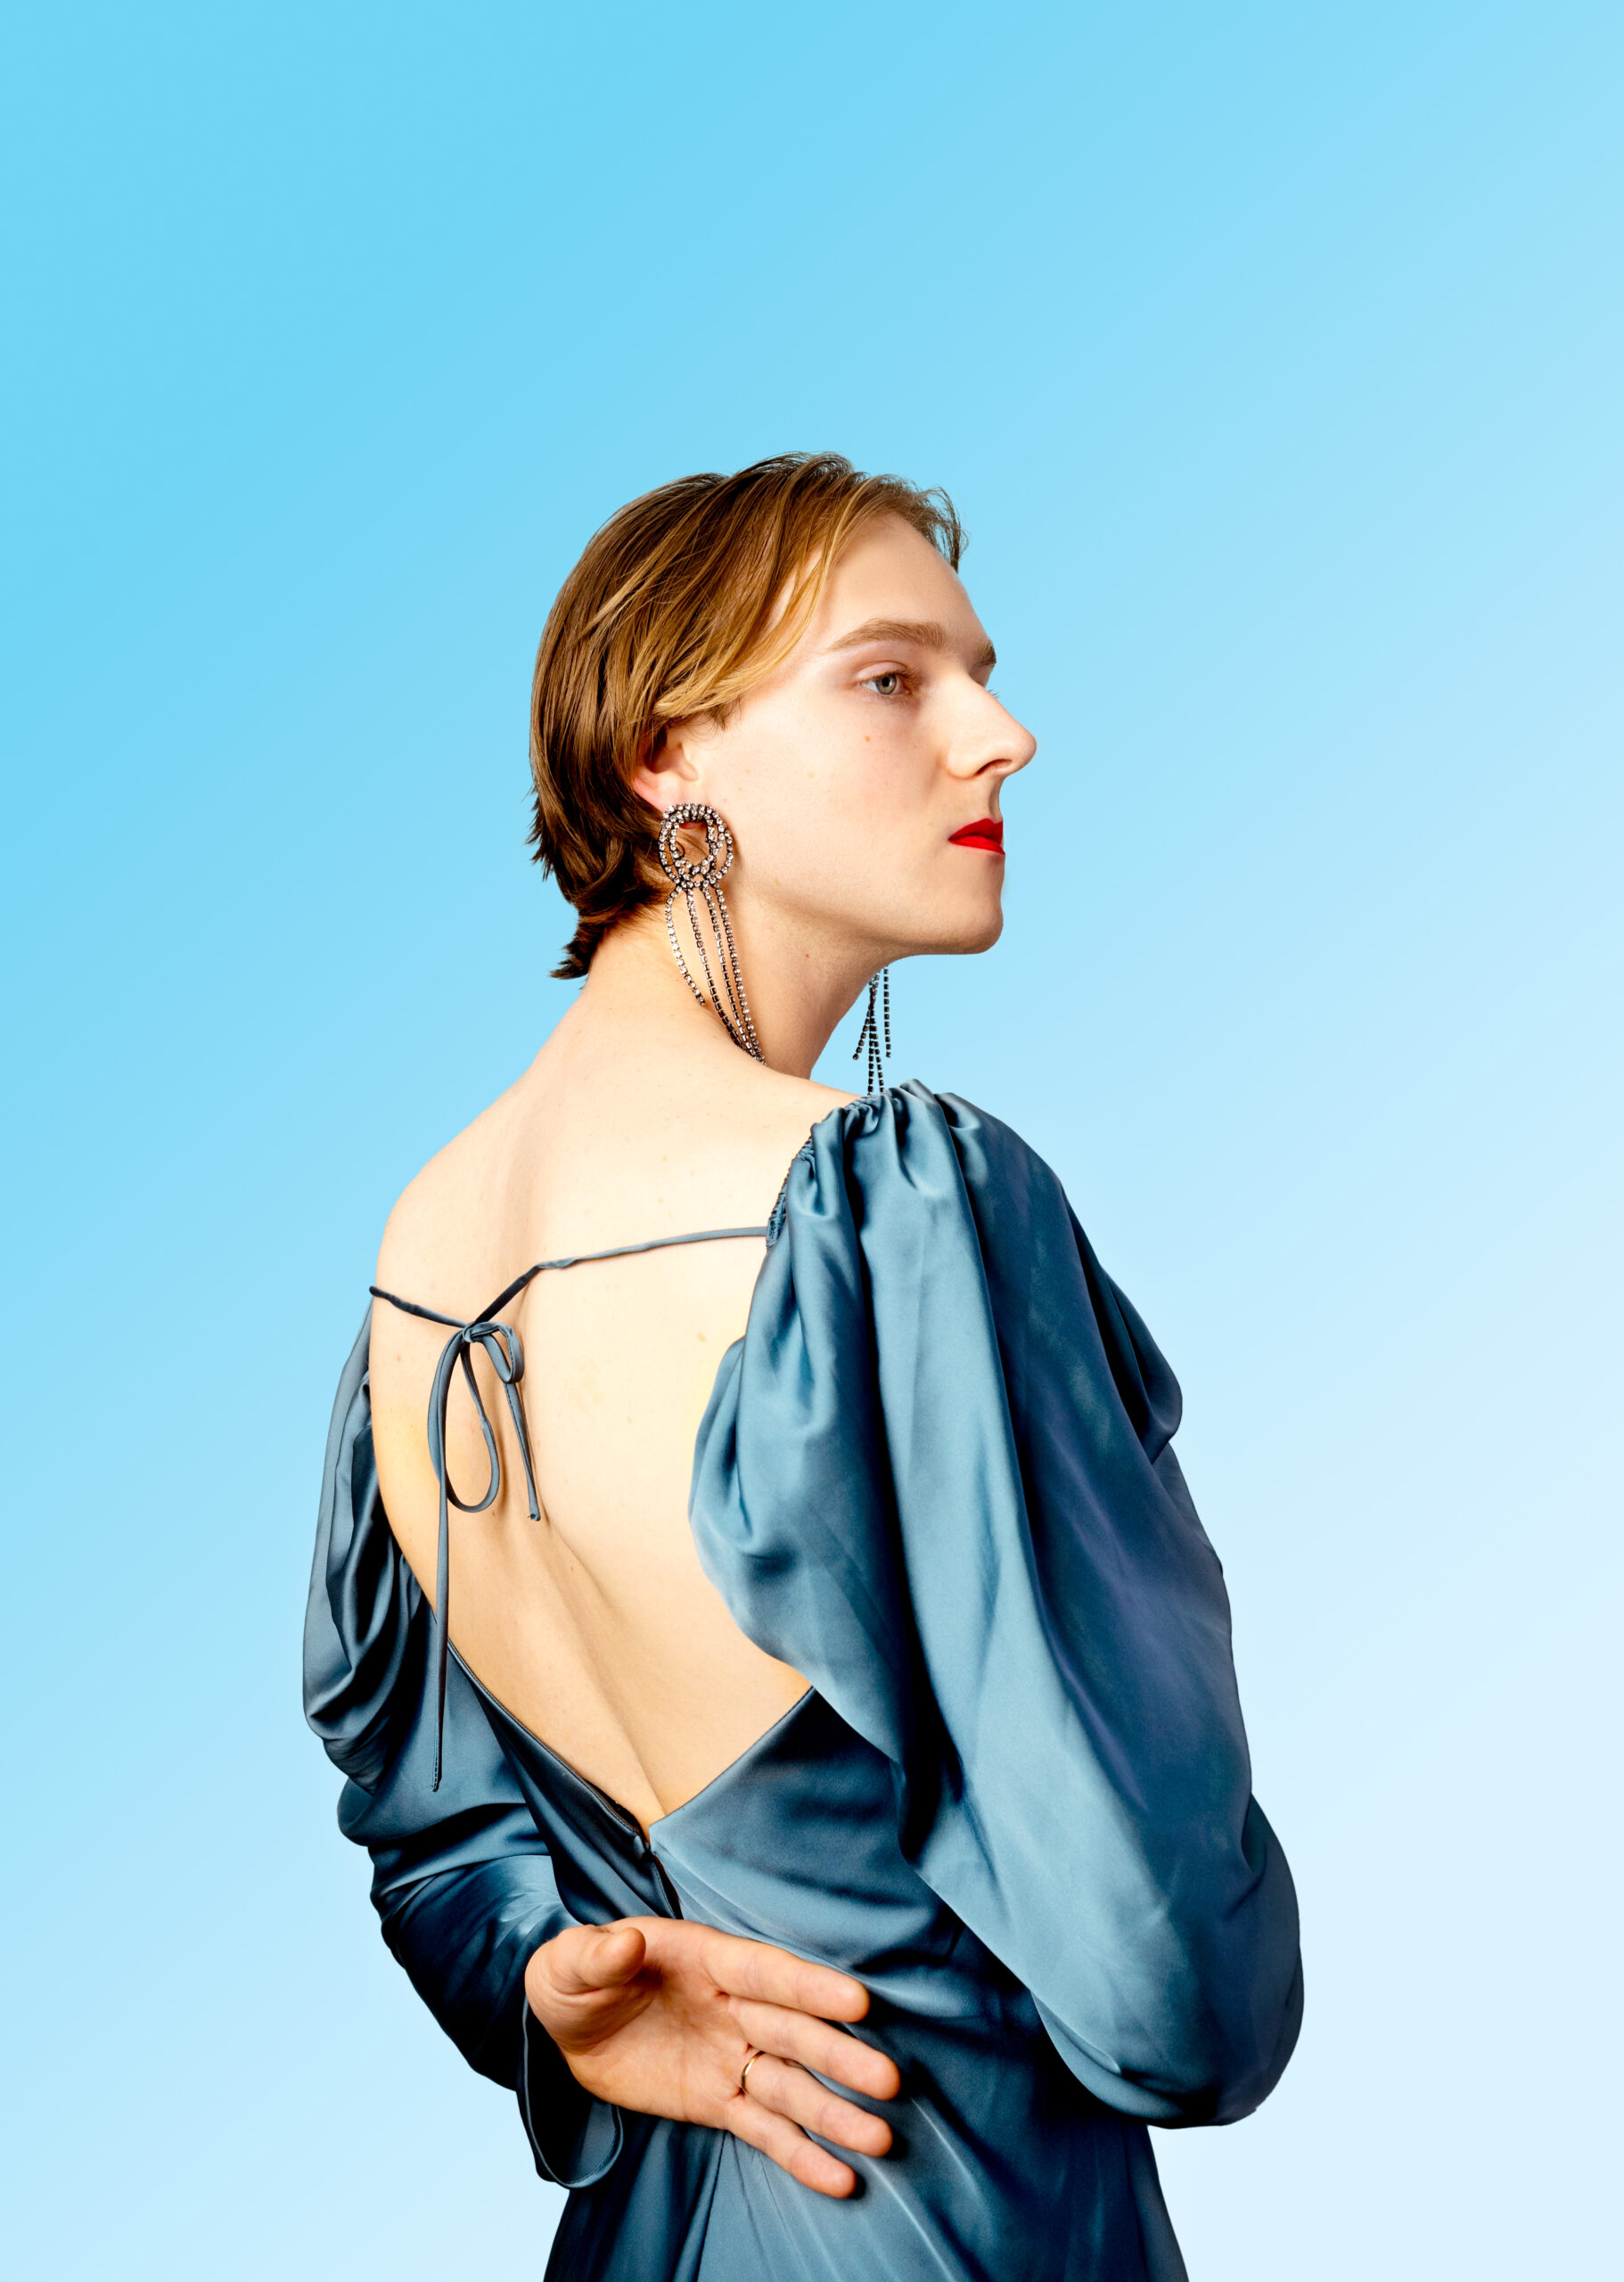 White model standing with their back at an angle with one hand resting on their lower back while wearing a blue silk dress, red lipstick, and silver earrings against a blue gradient backdrop.